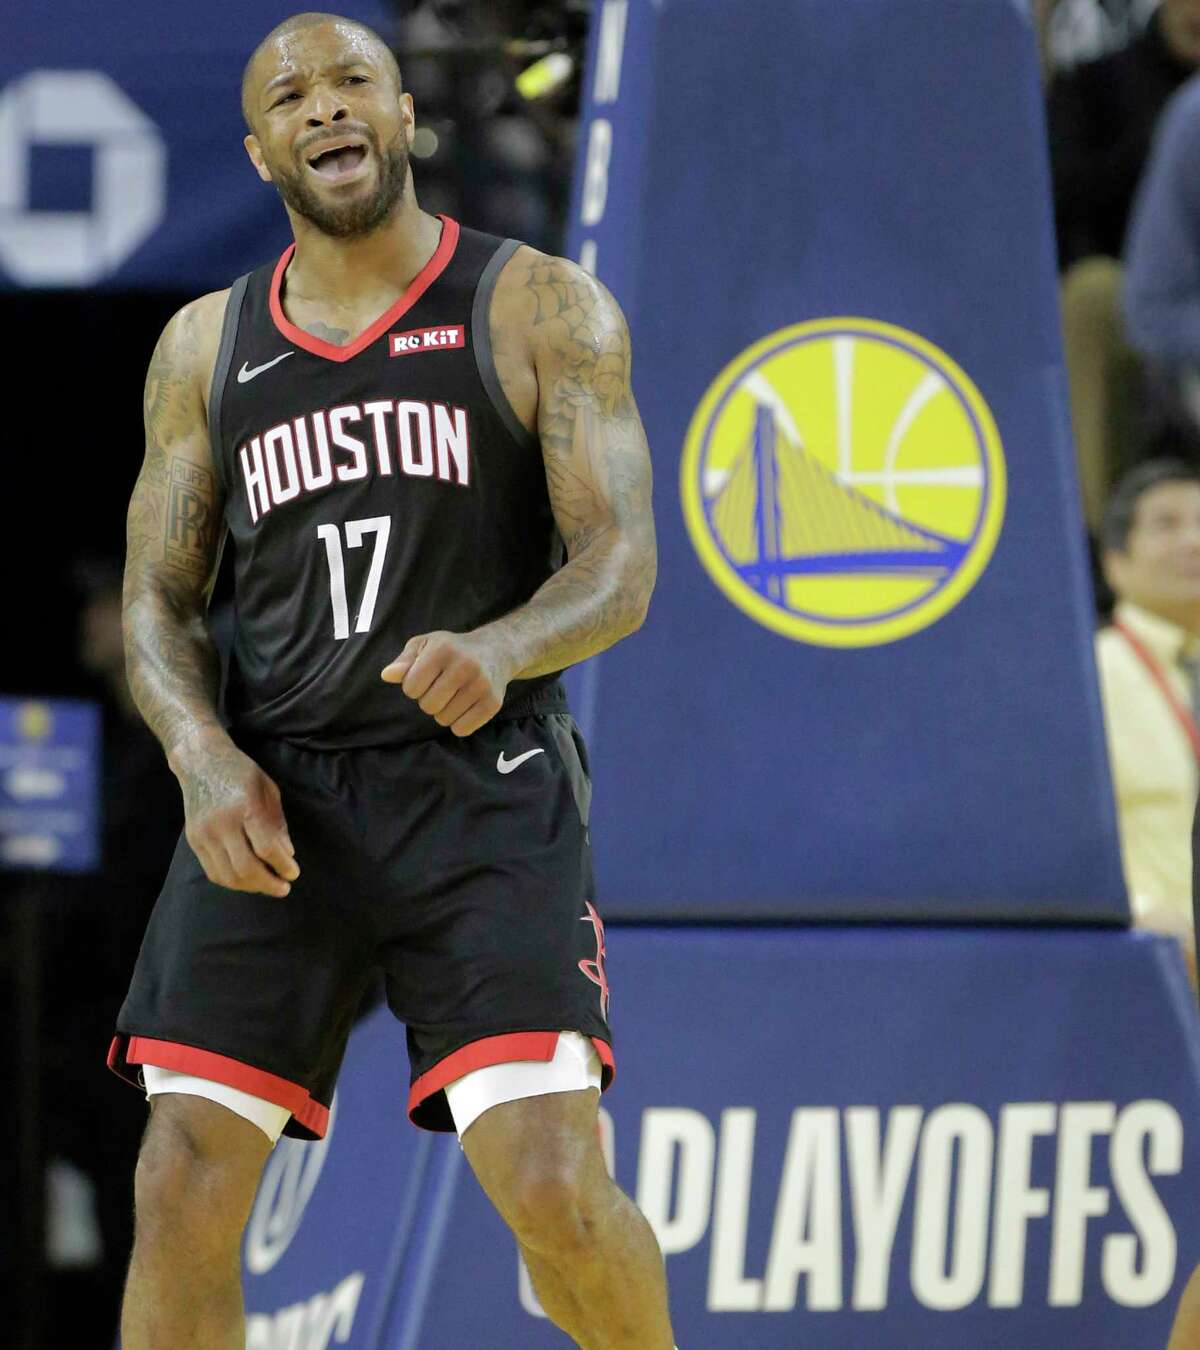 Houston Rockets forward PJ Tucker (17) reacts to having a foul called on him during the first half of Game 5 of the NBA Western Conference semifinals against the Golden State Warriors at Oracle Arena on Wednesday, May 8, 2019, in Oakland.